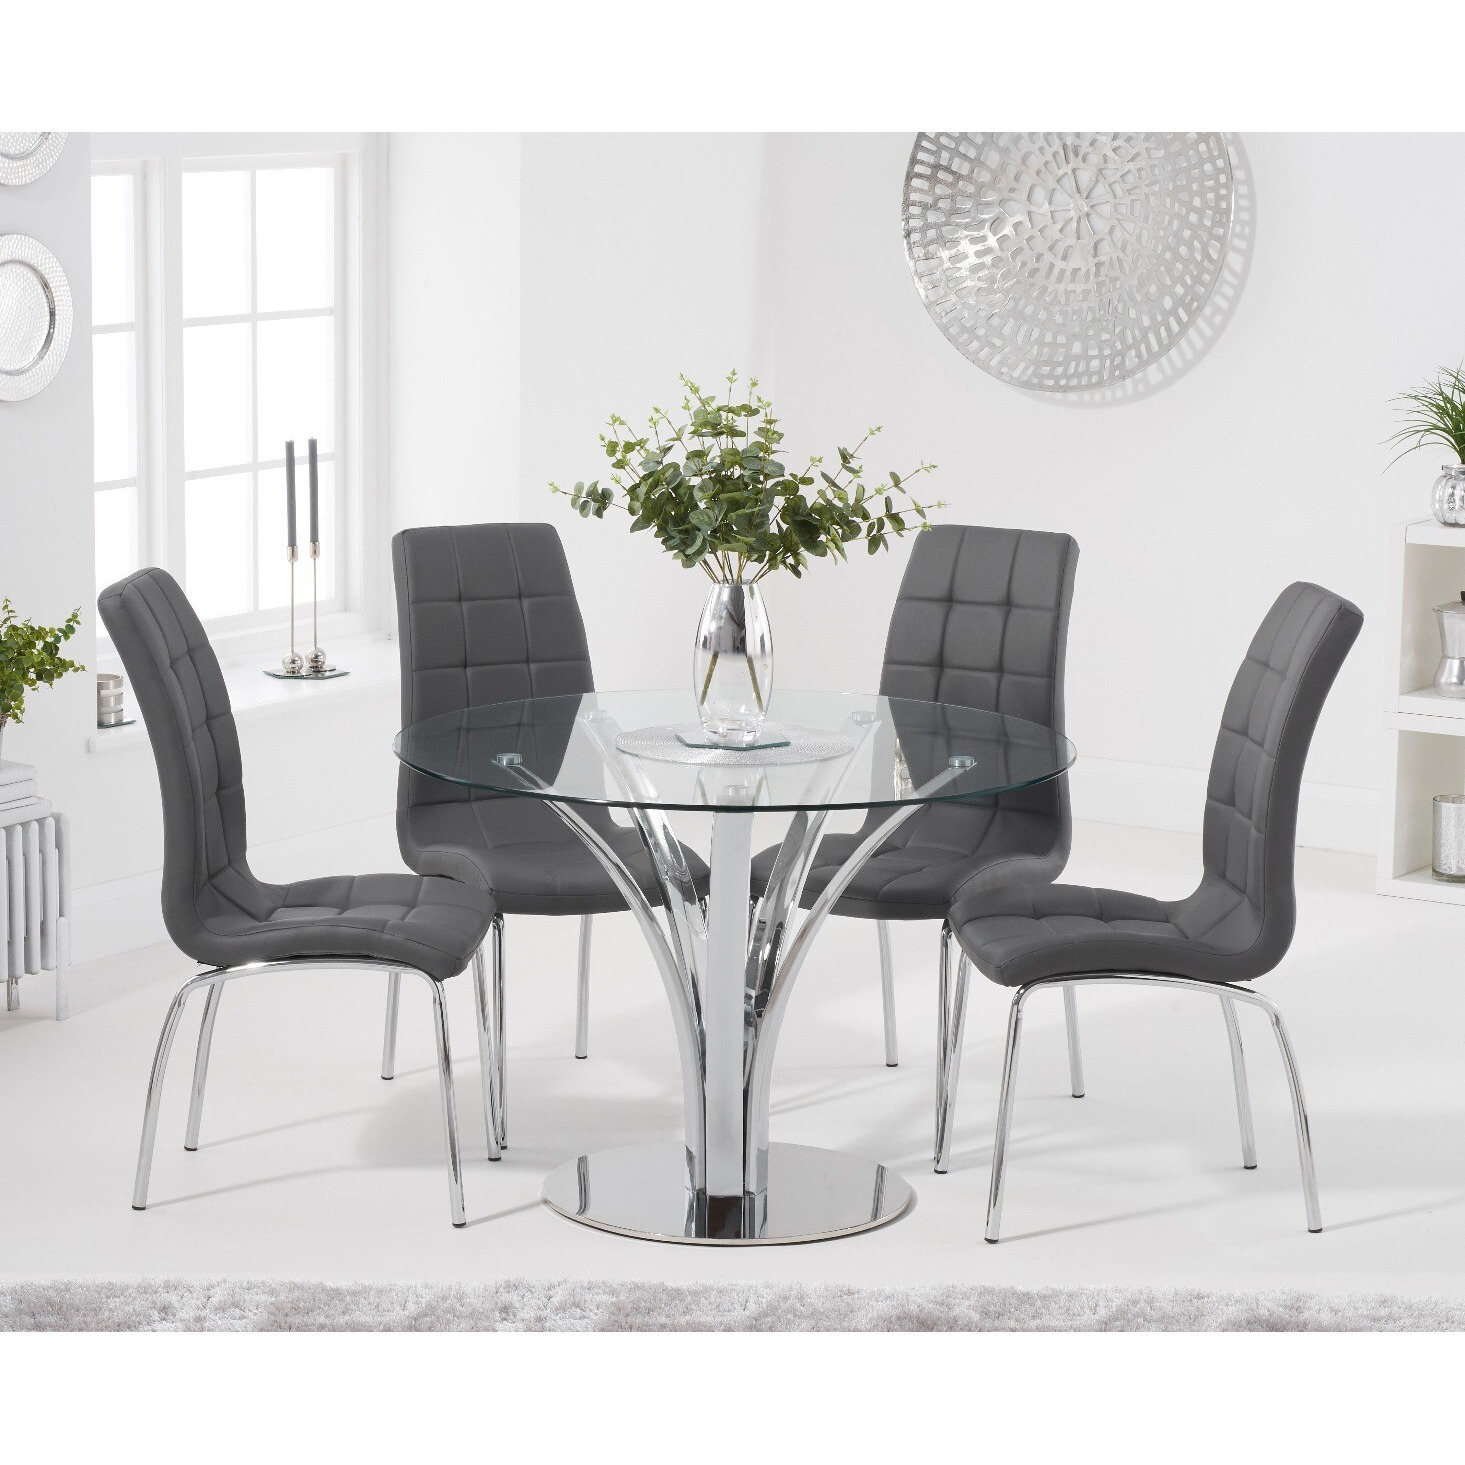 Aria 110cm Glass Dining Table With 4 Brown Calgary Faux Leather Chairs